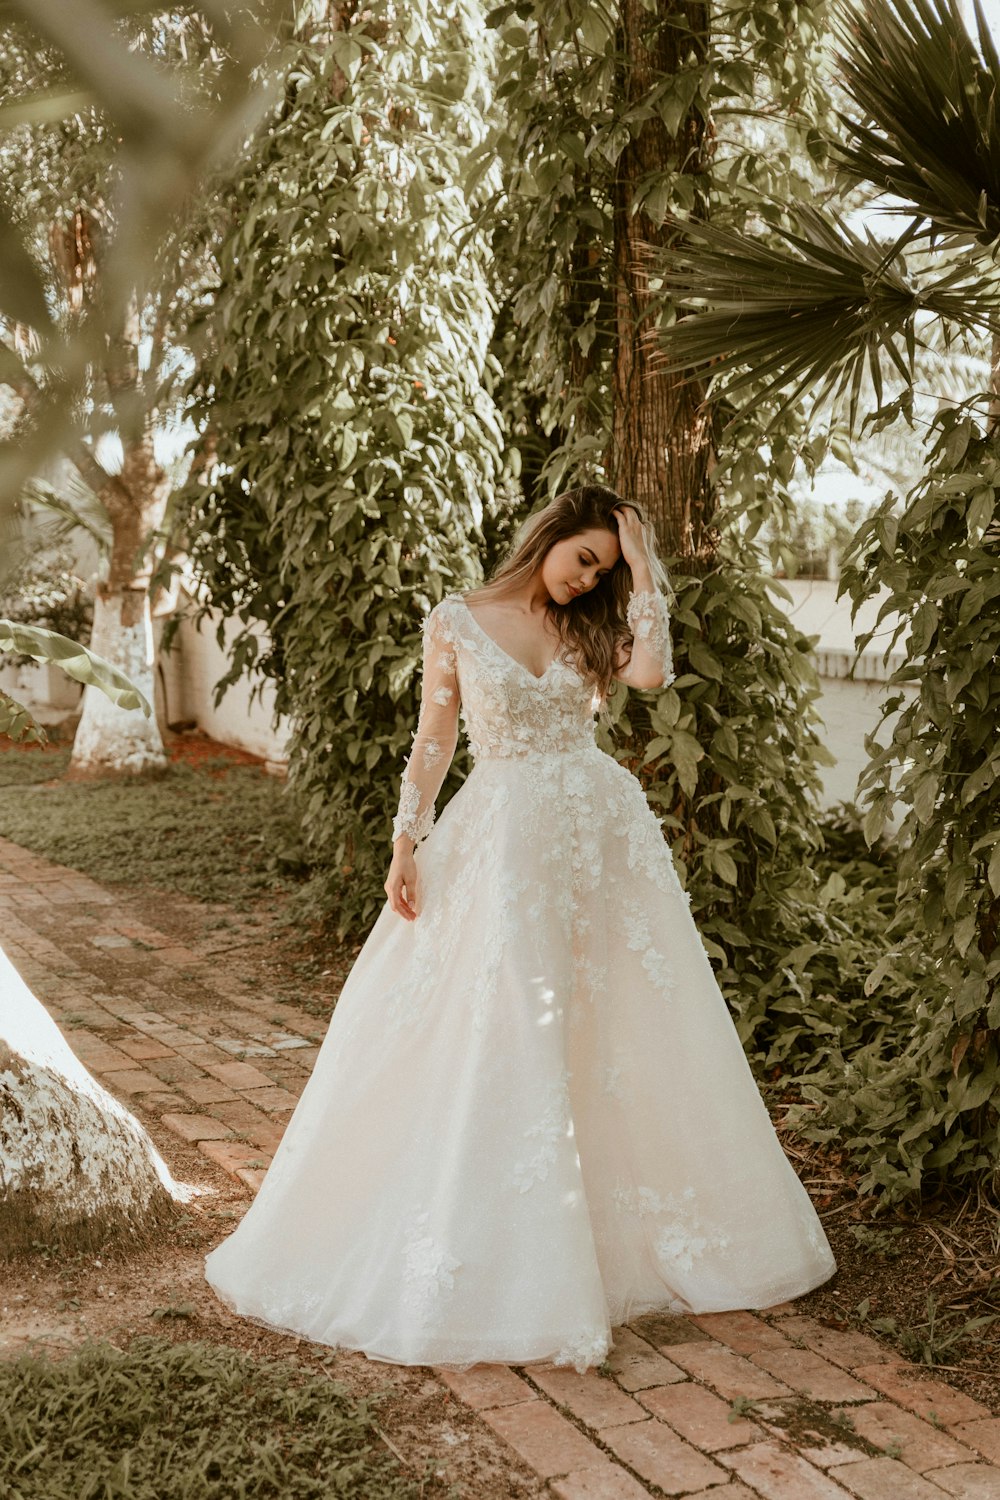 100+ Wedding Dress Pictures | Download Free Images & Stock Photos on  Unsplash